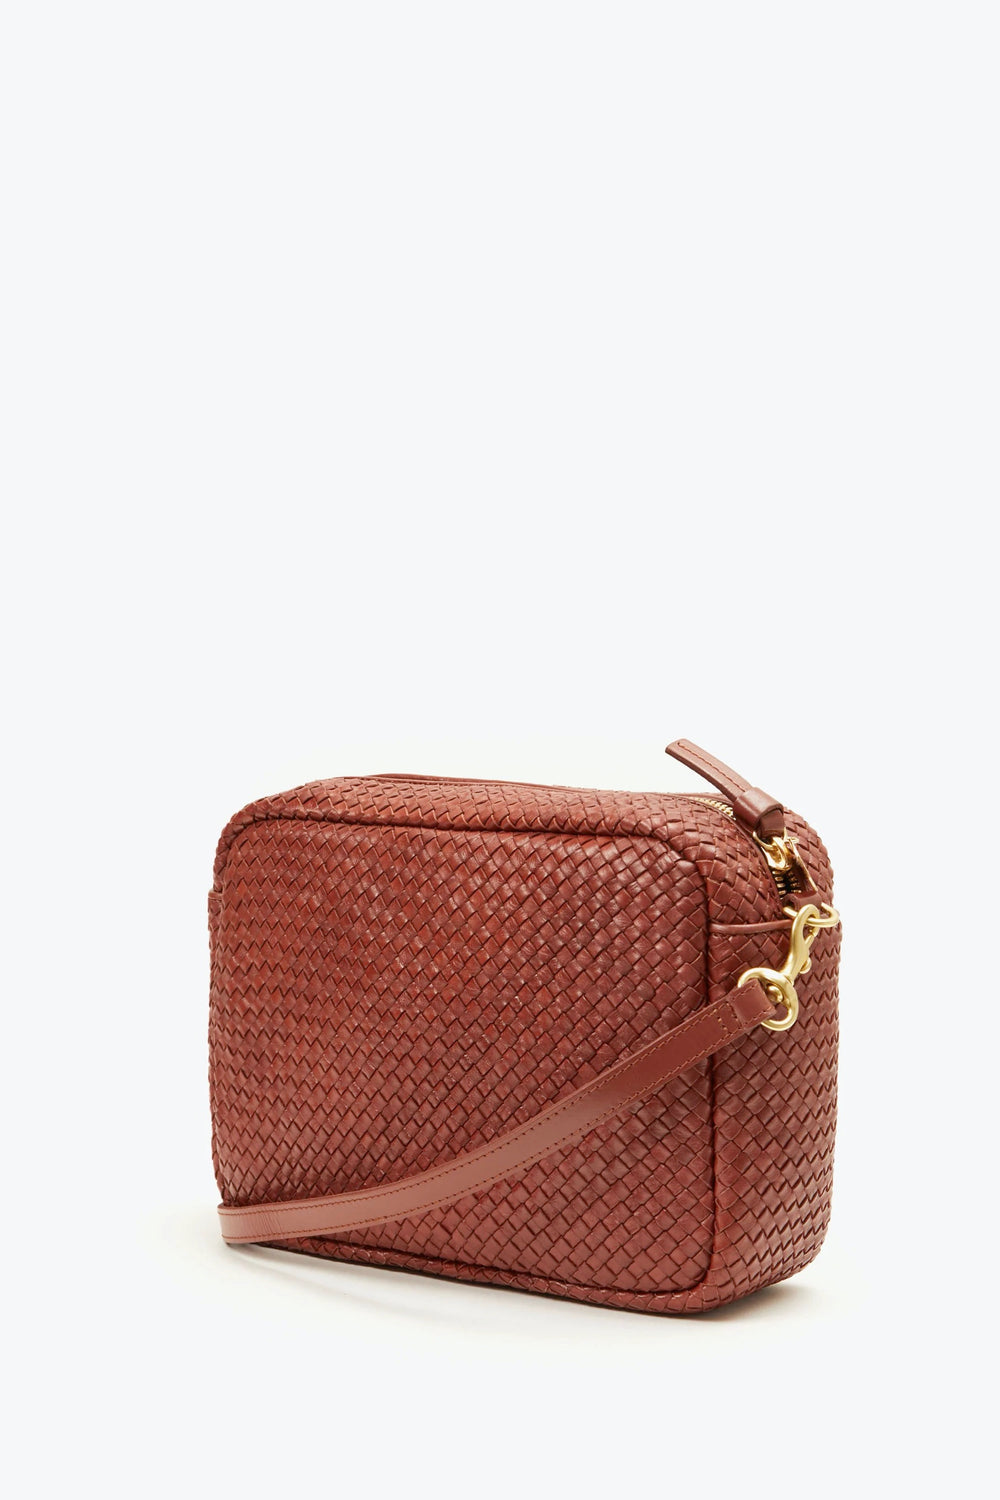 Toffee Woven Marisol Bag